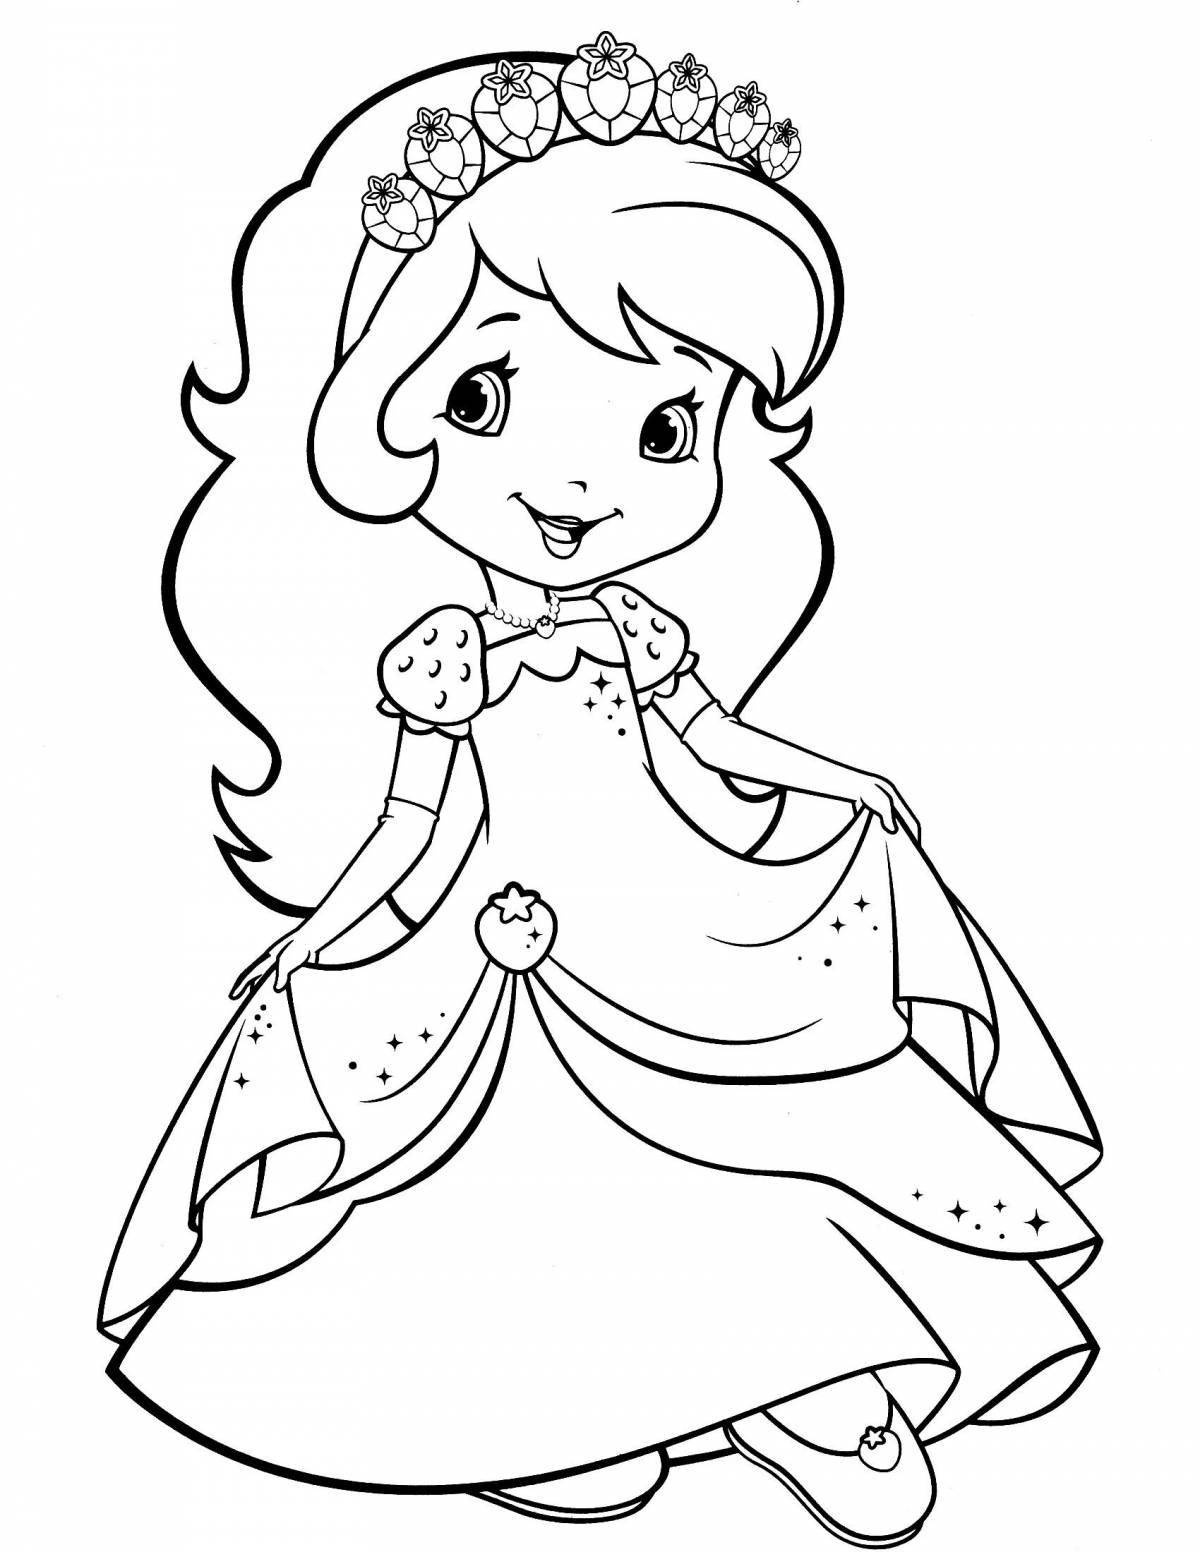 Adorable princess coloring pages for girls 4-5 years old